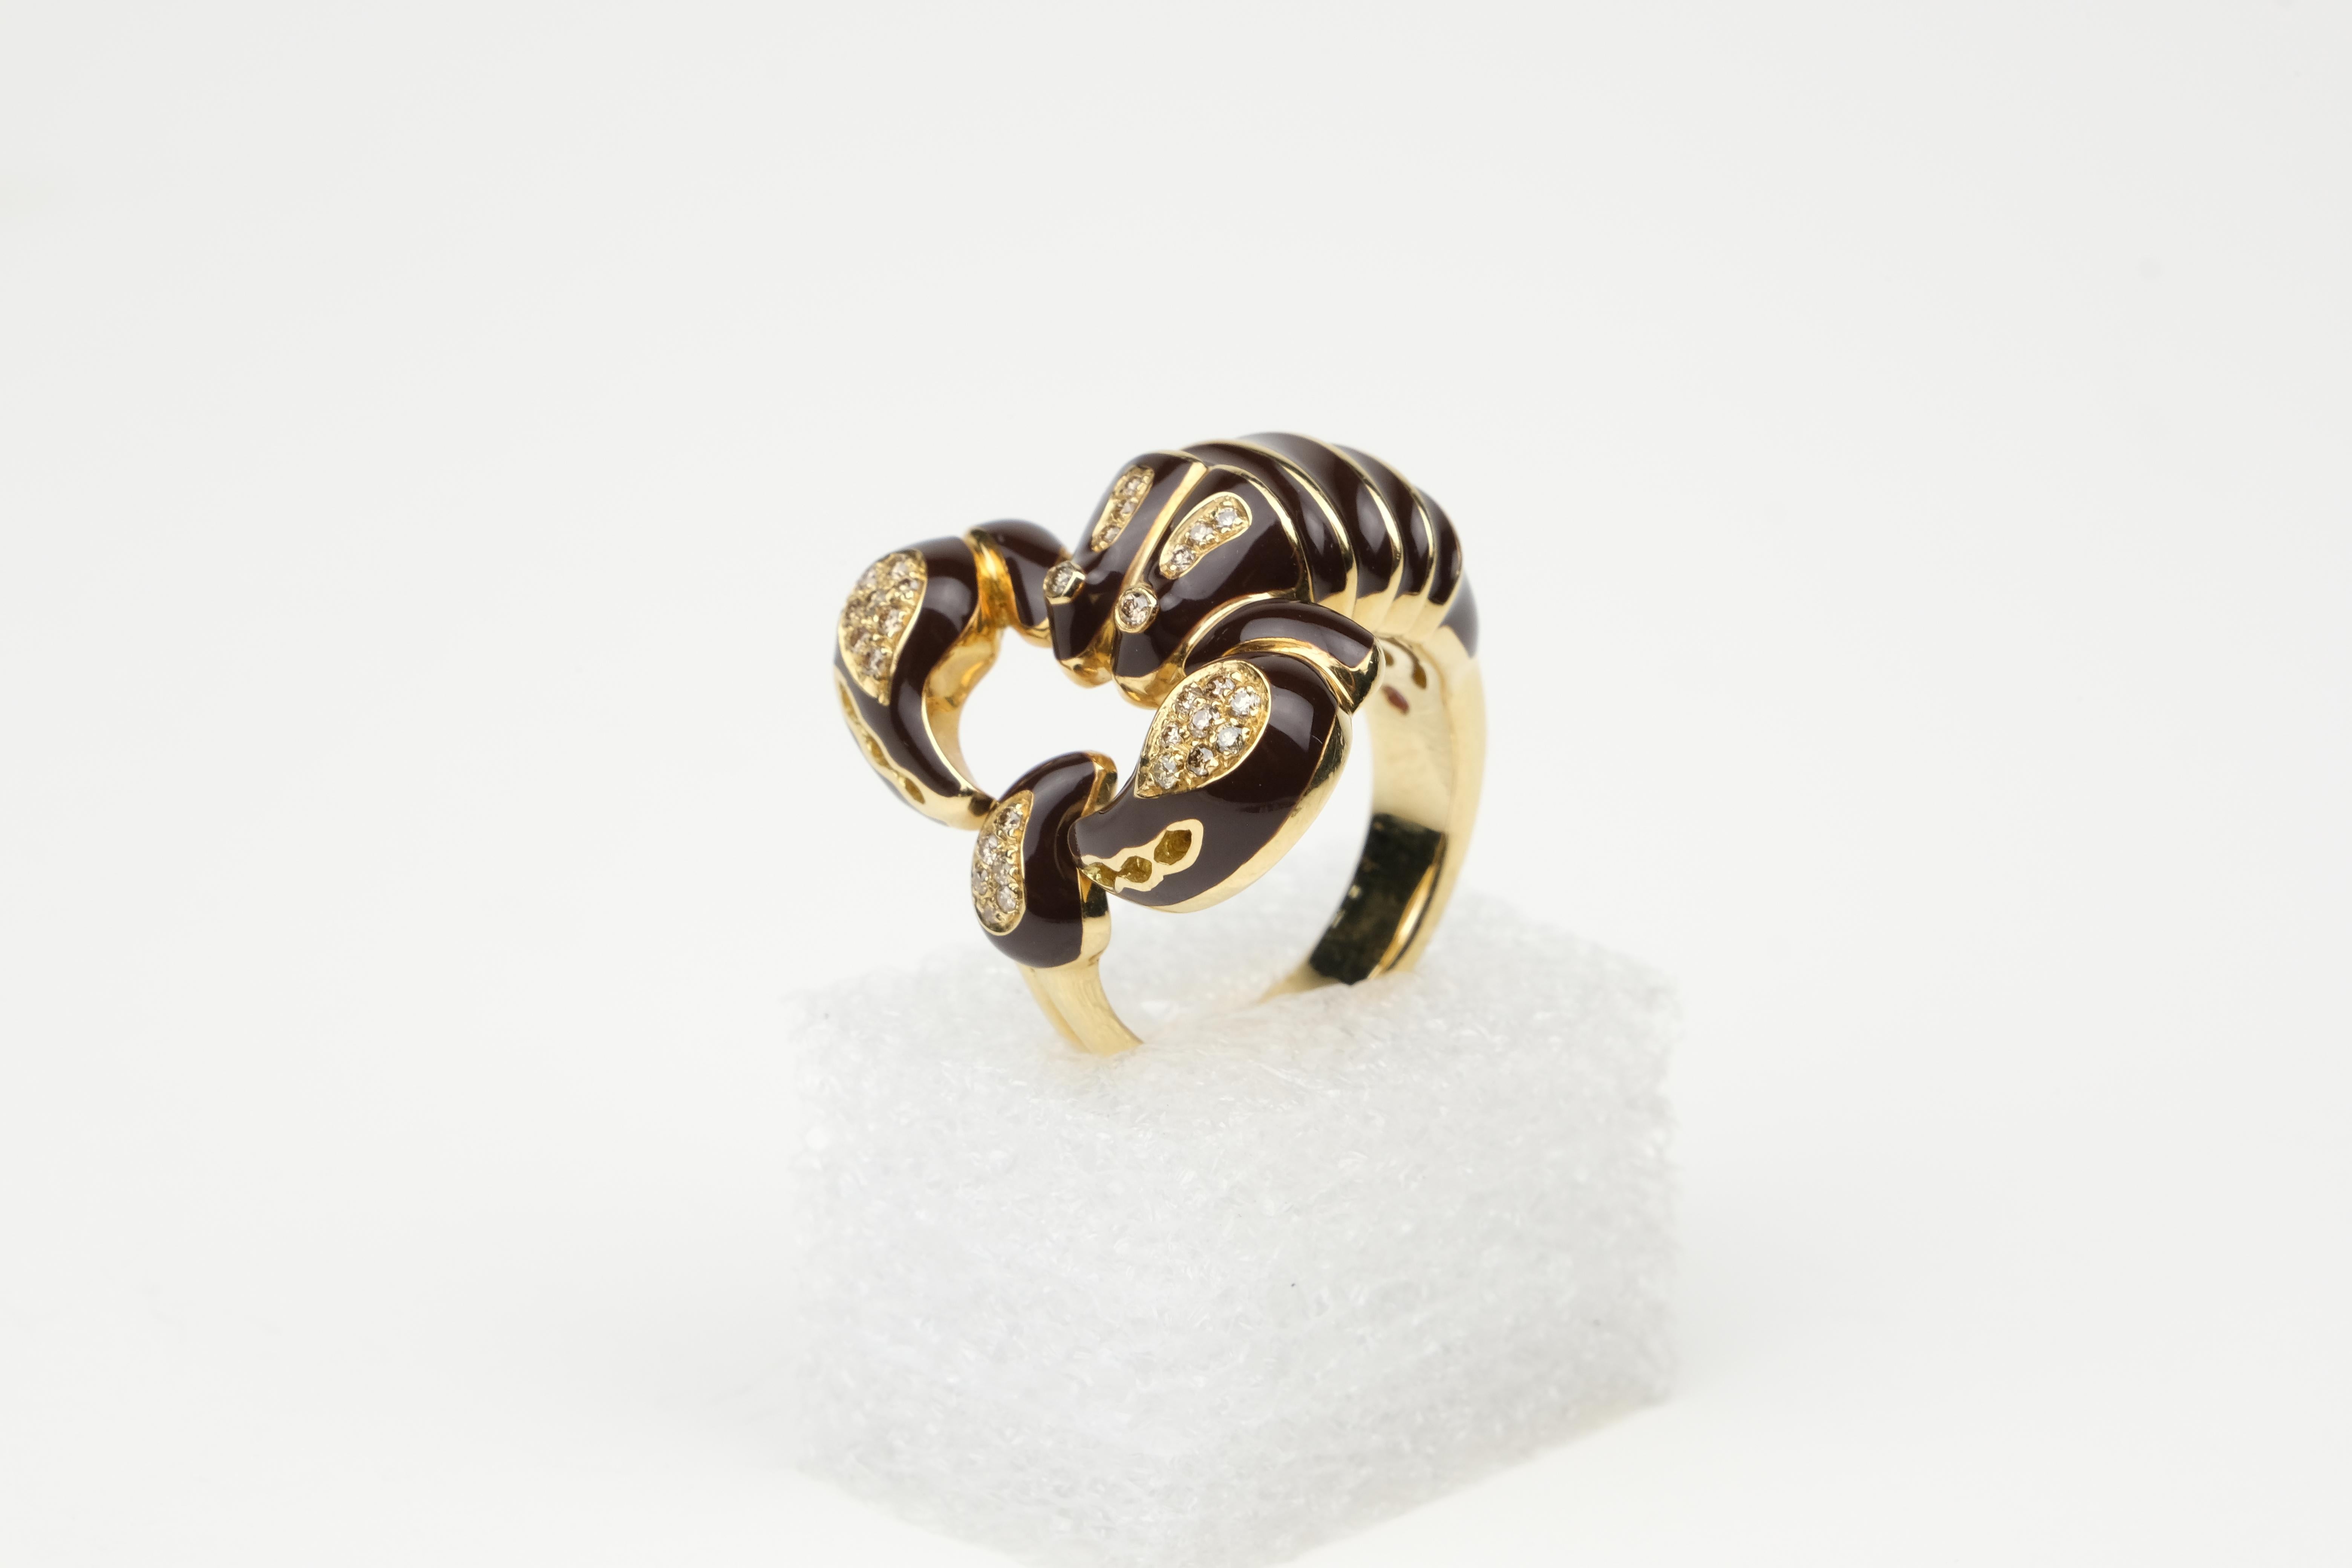 Roberto Coin 18K Diamond and Enamel Scorpion Ring

Ok, this ring is just plain cool. You don’t have to be a Scorpio to like scorpions, especially this one.

It is from the Roberto Coin Animalier collection and rendered in 18k gold with black